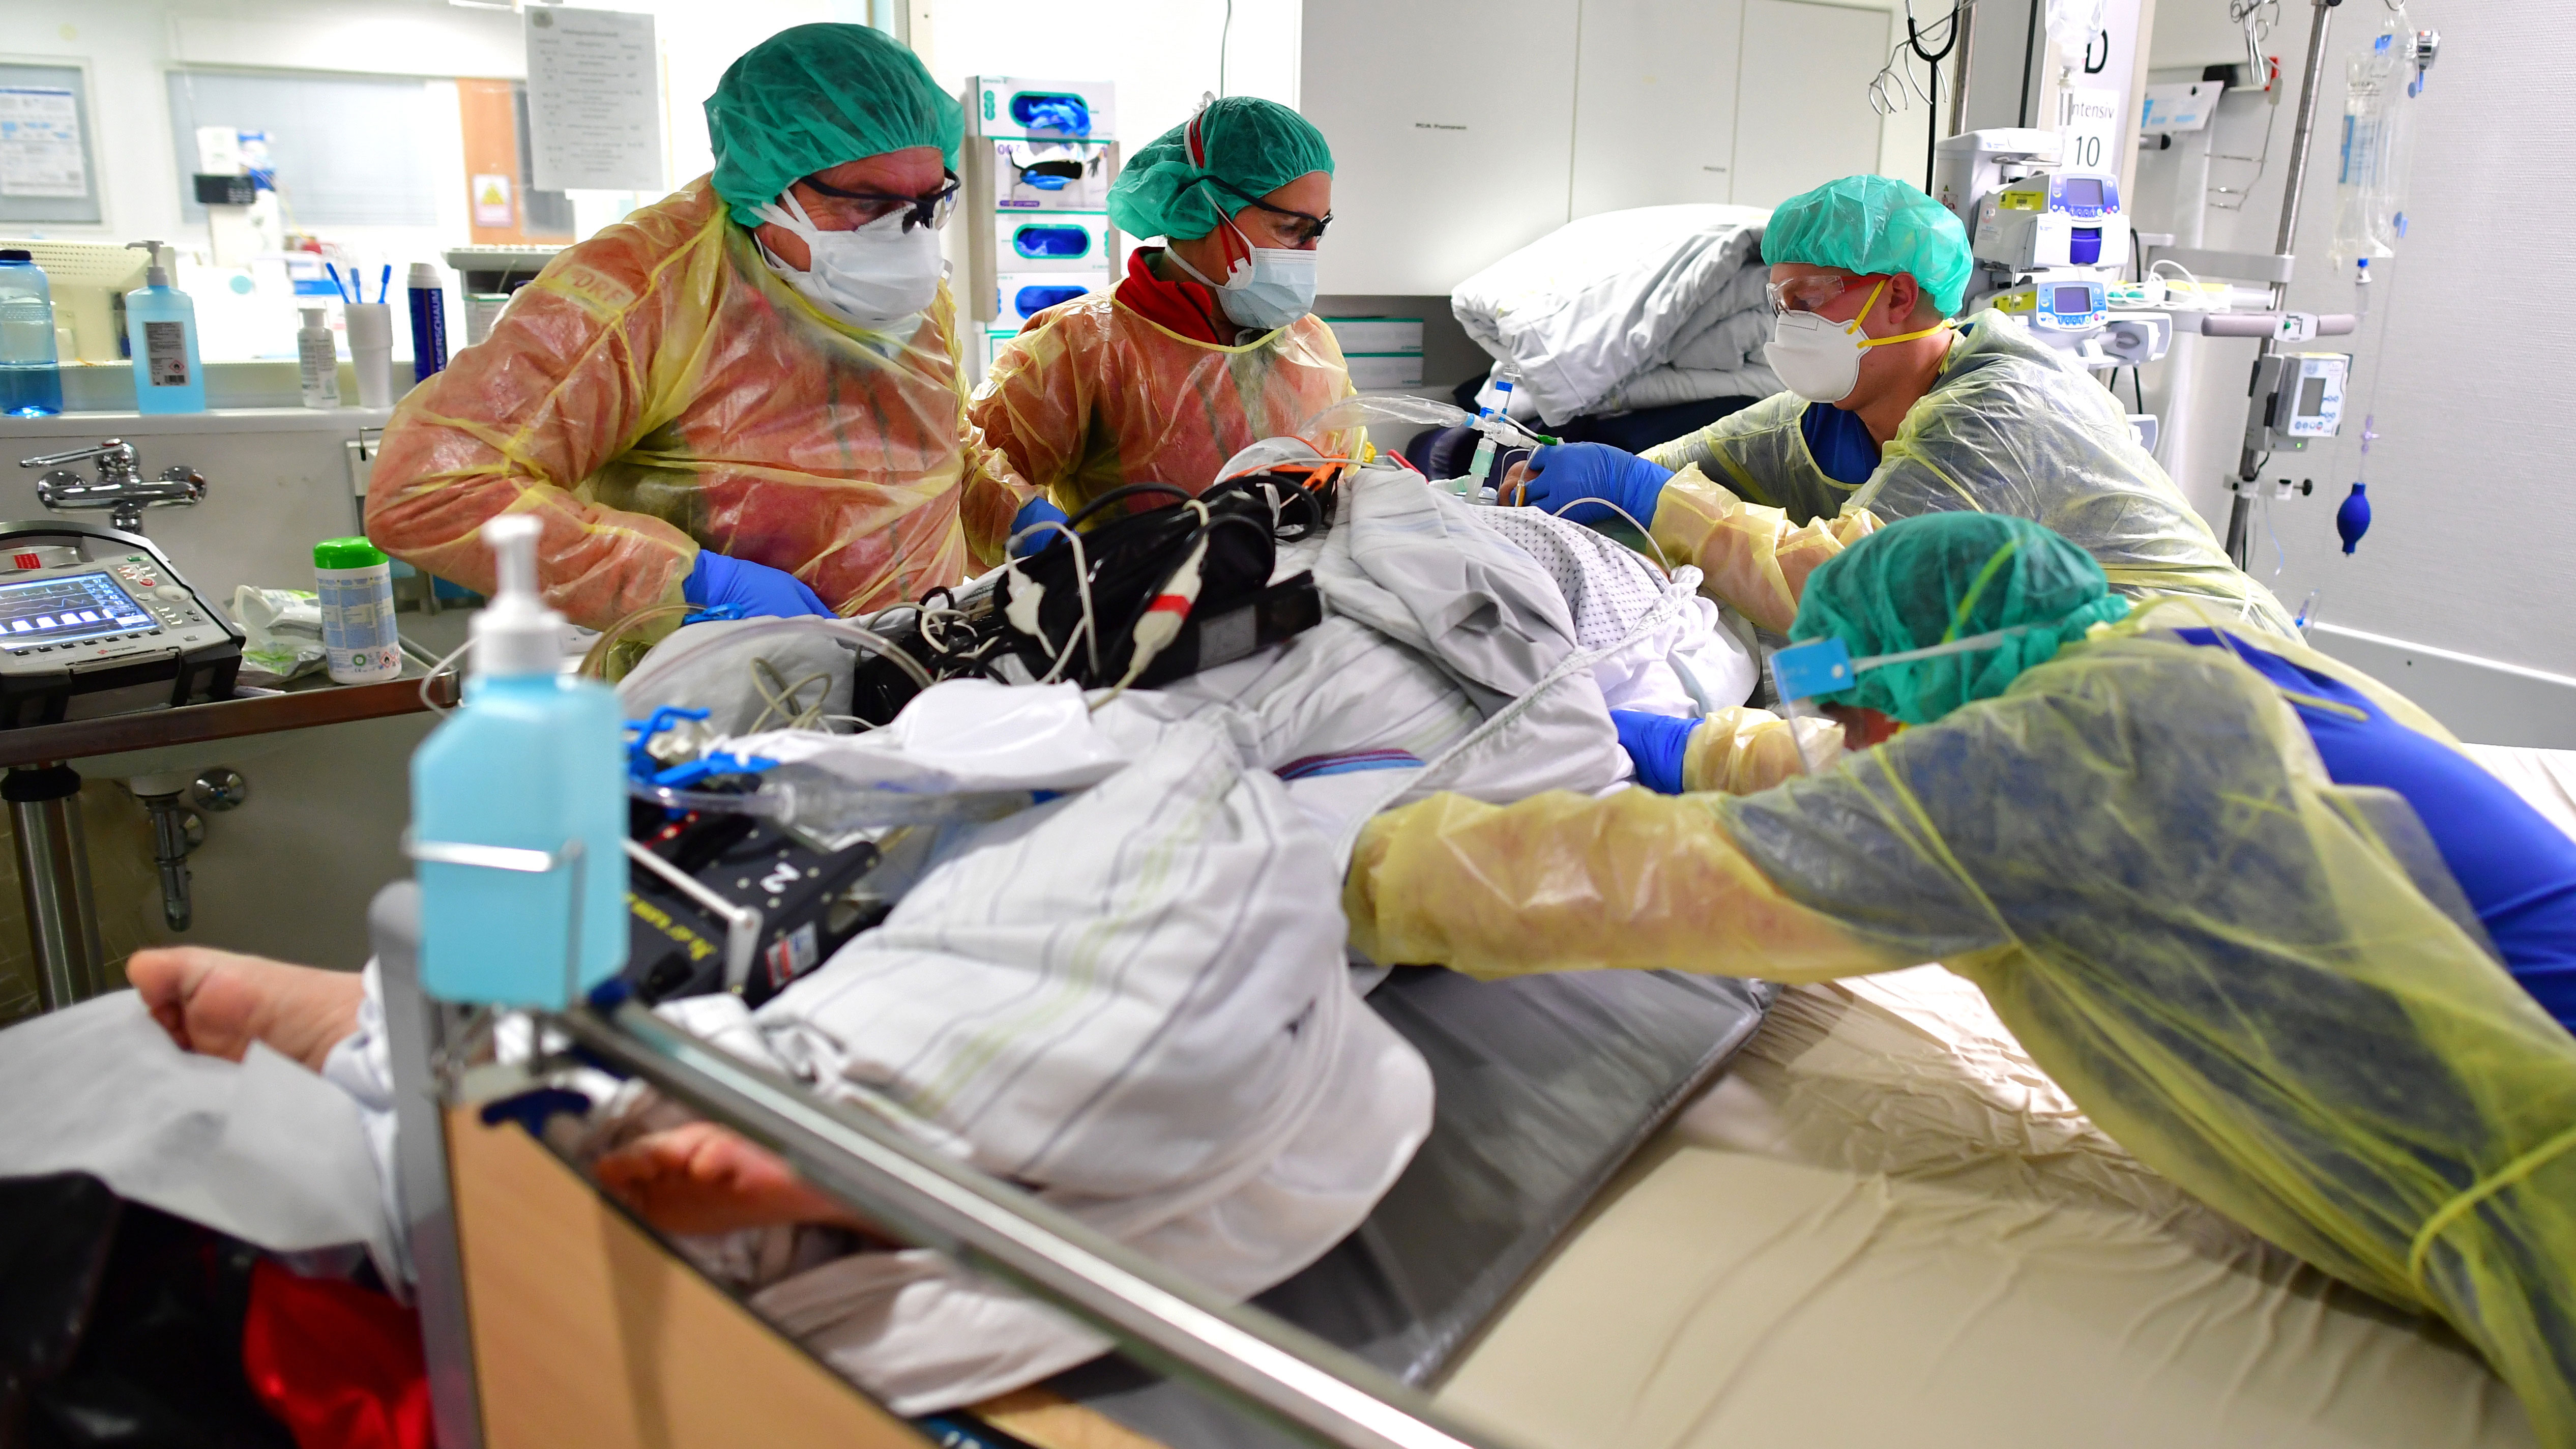 A German doctor and team prepare a COVID-19 patient for transfer from one COVID-19 intensive care unit for transport by helicopter to another hospital during the fourth wave of the coronavirus pandemic in Nuremberg.